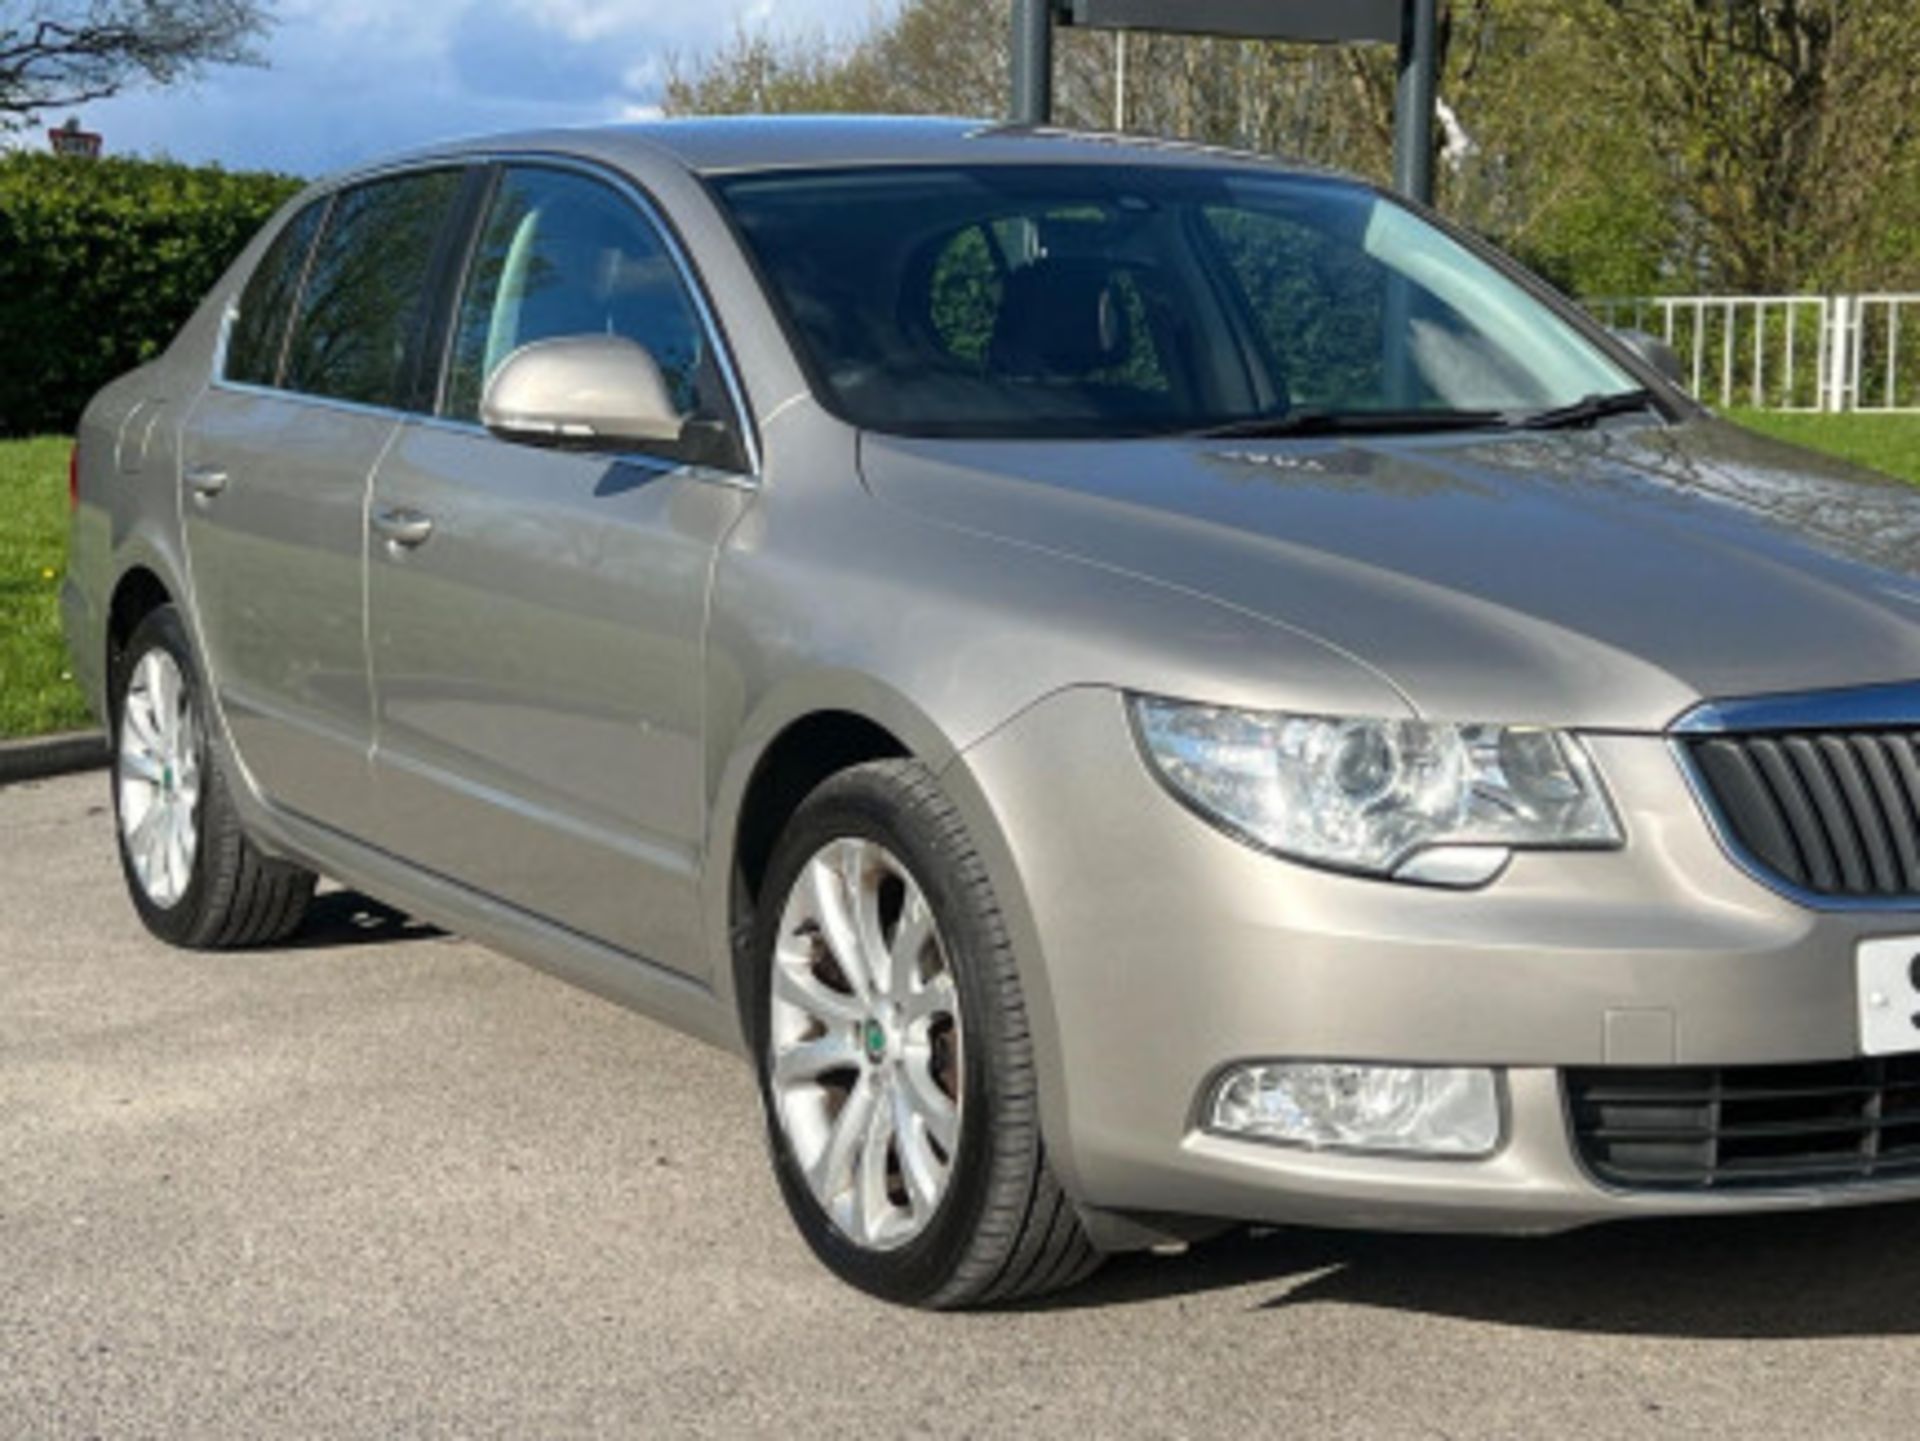 >>--NO VAT ON HAMMER--<<STYLISH AND RELIABLE SKODA SUPERB 1.6 TDI S GREENLINE II EURO 5 - Image 72 of 141